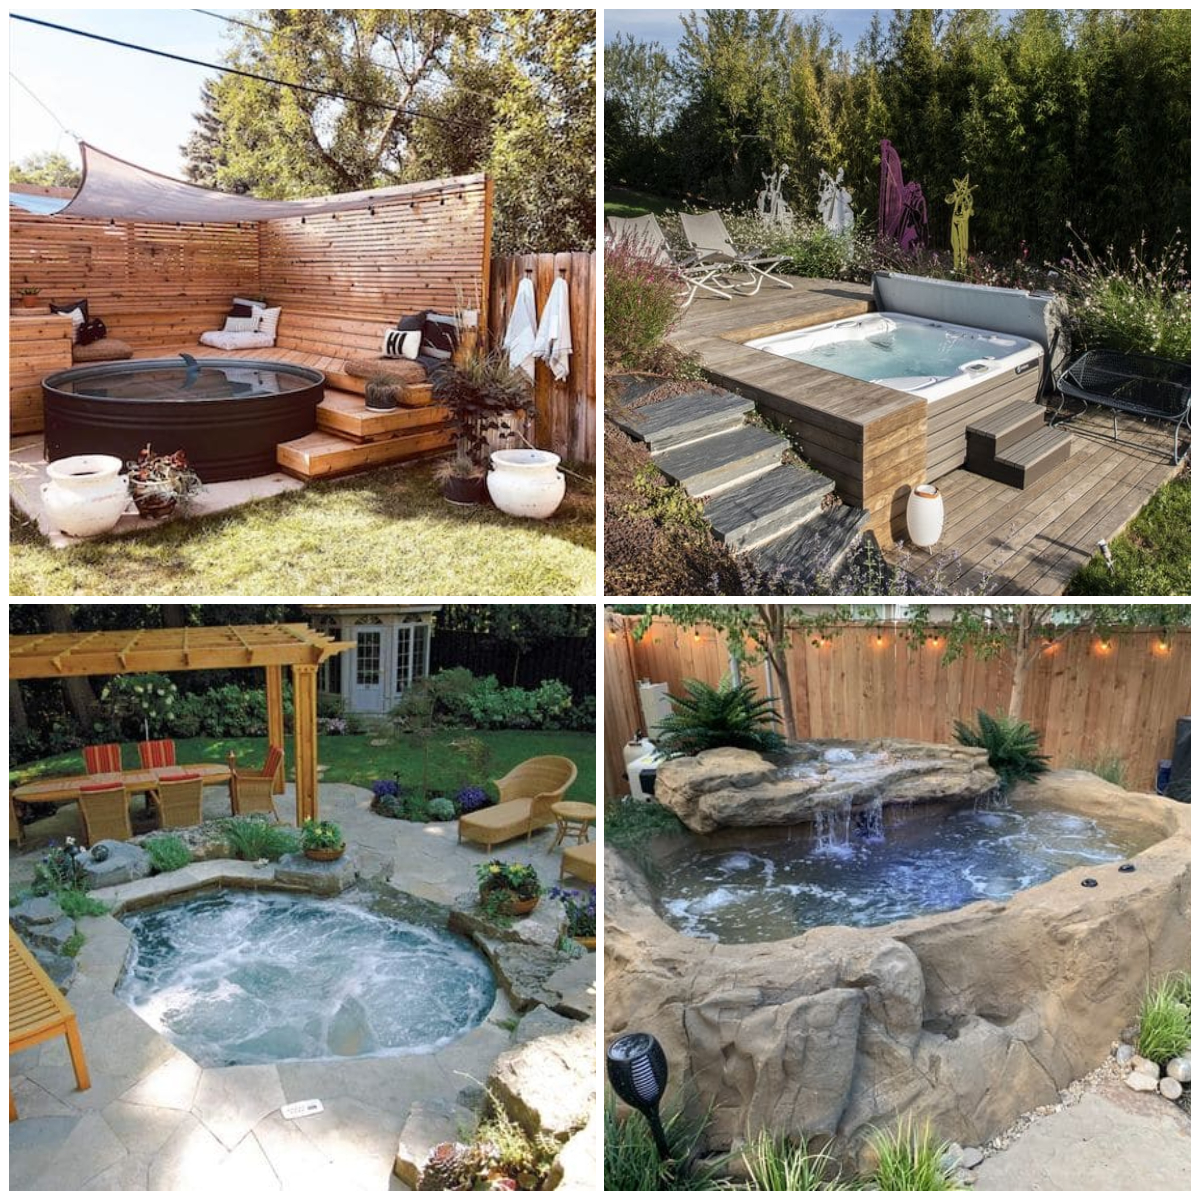 27 Mind-blowing Hot Tub Ideas for Outdoor Relaxing Moments